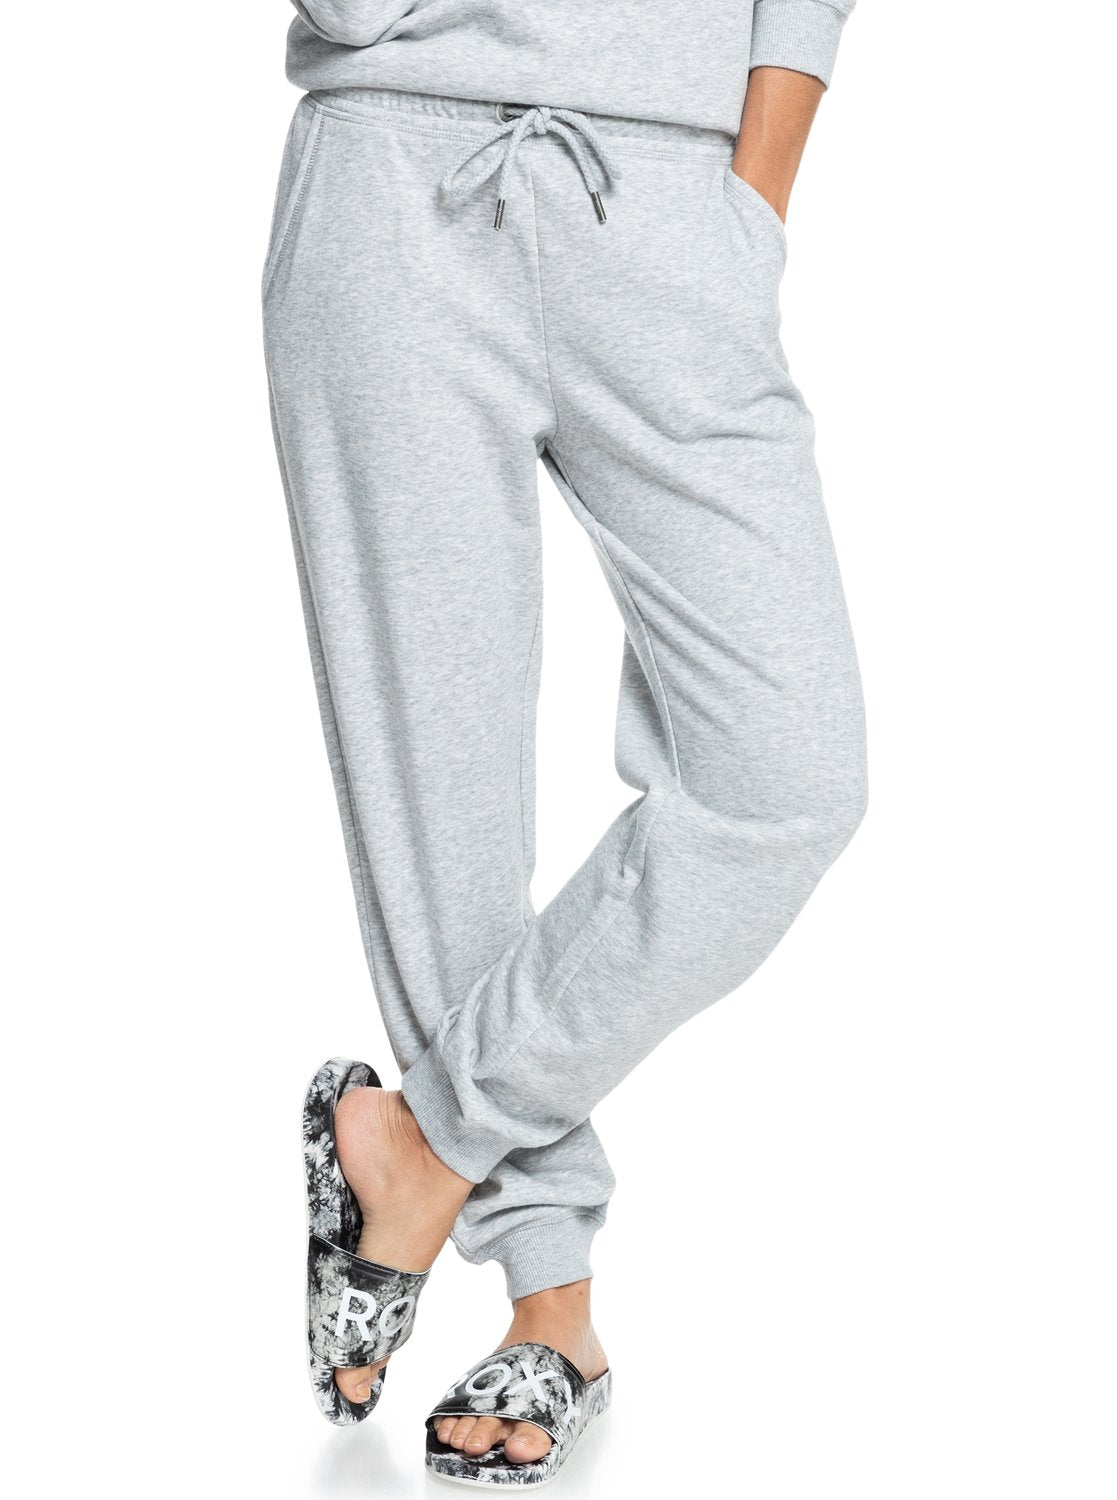 ROXY - SURF STOKED PANT - GREY